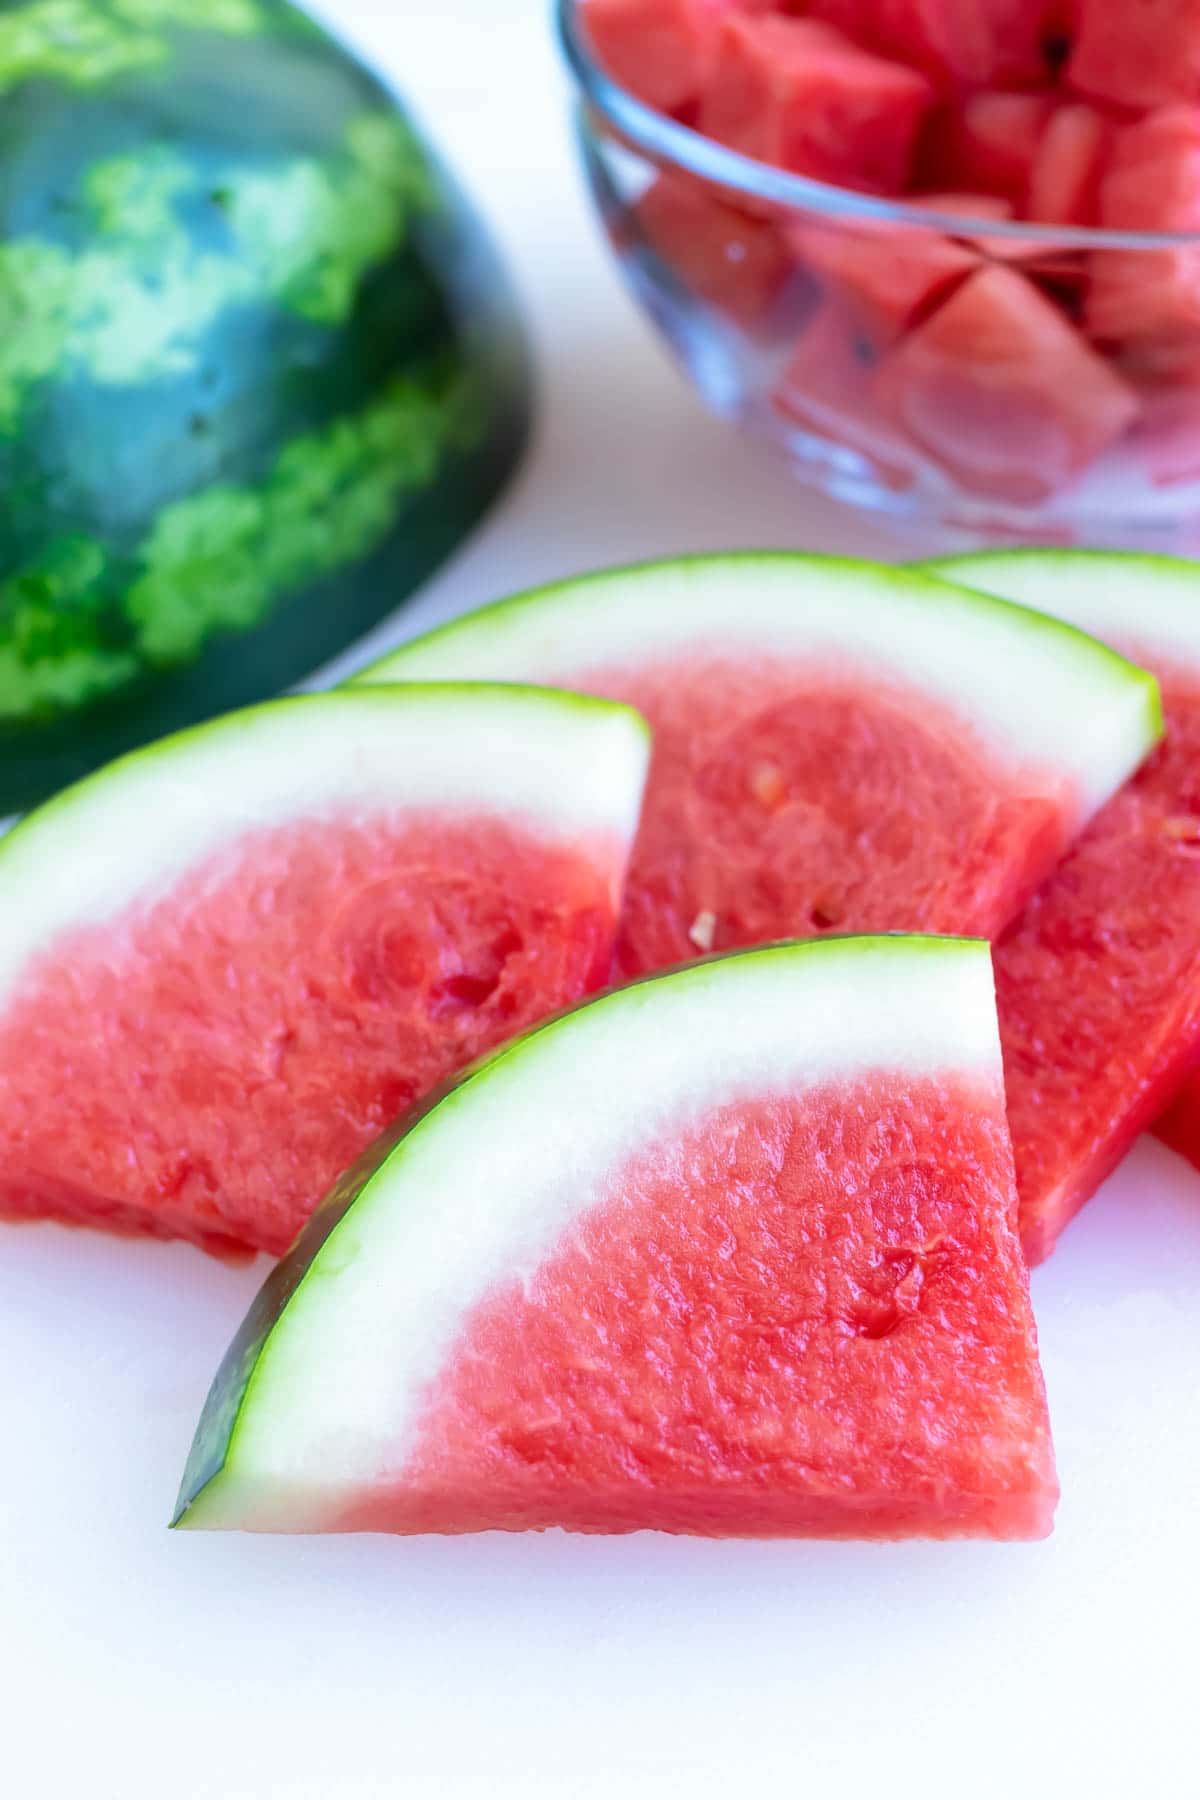 A pile of watermelon slices with a full melon in the background.